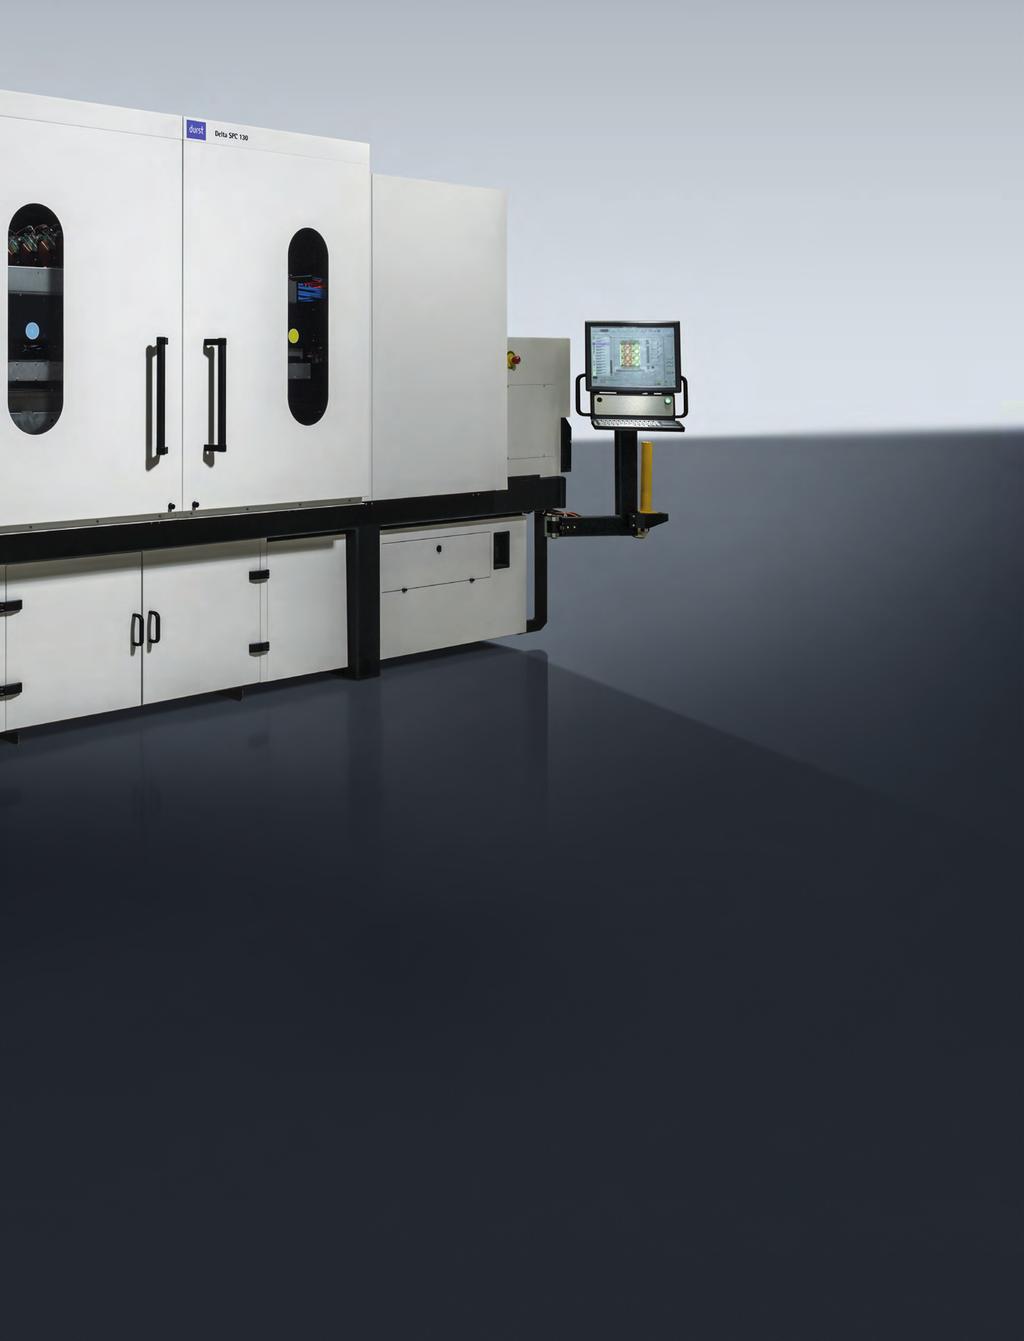 With the Delta SPC 130, Durst is now adapting its Single-Pass technology for the corrugated industry.